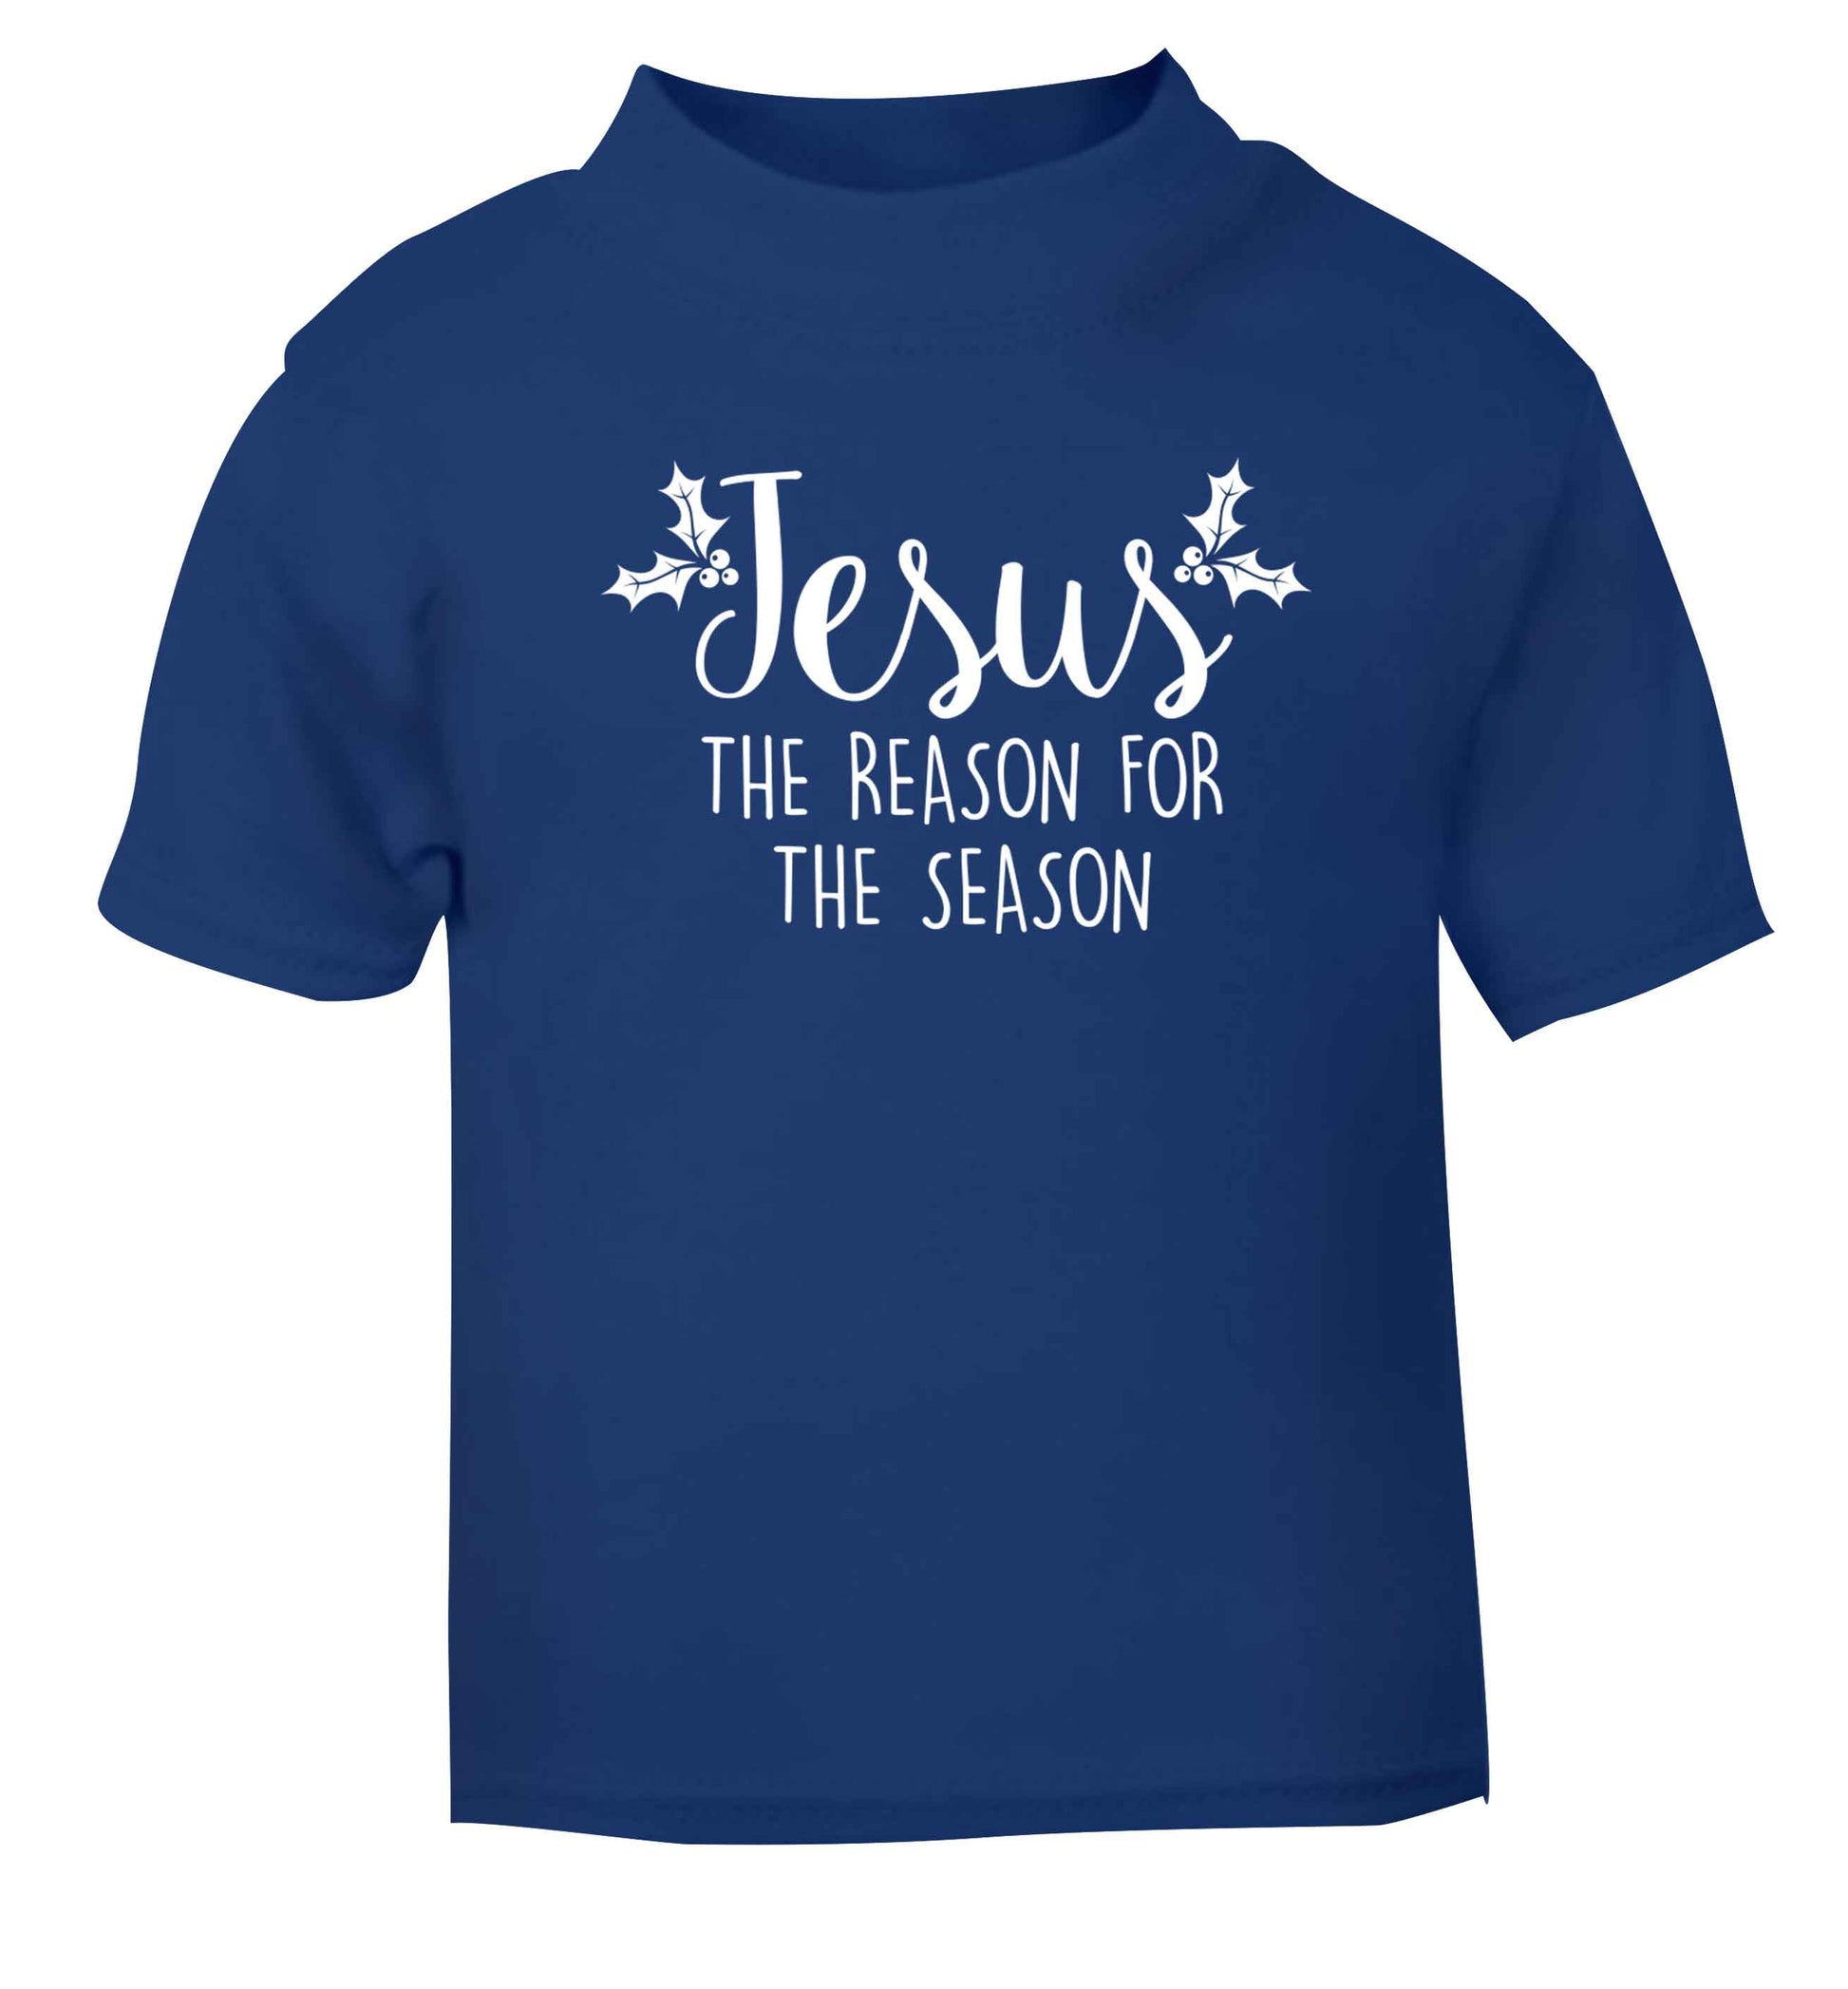 Jesus the reason for the season blue baby toddler Tshirt 2 Years